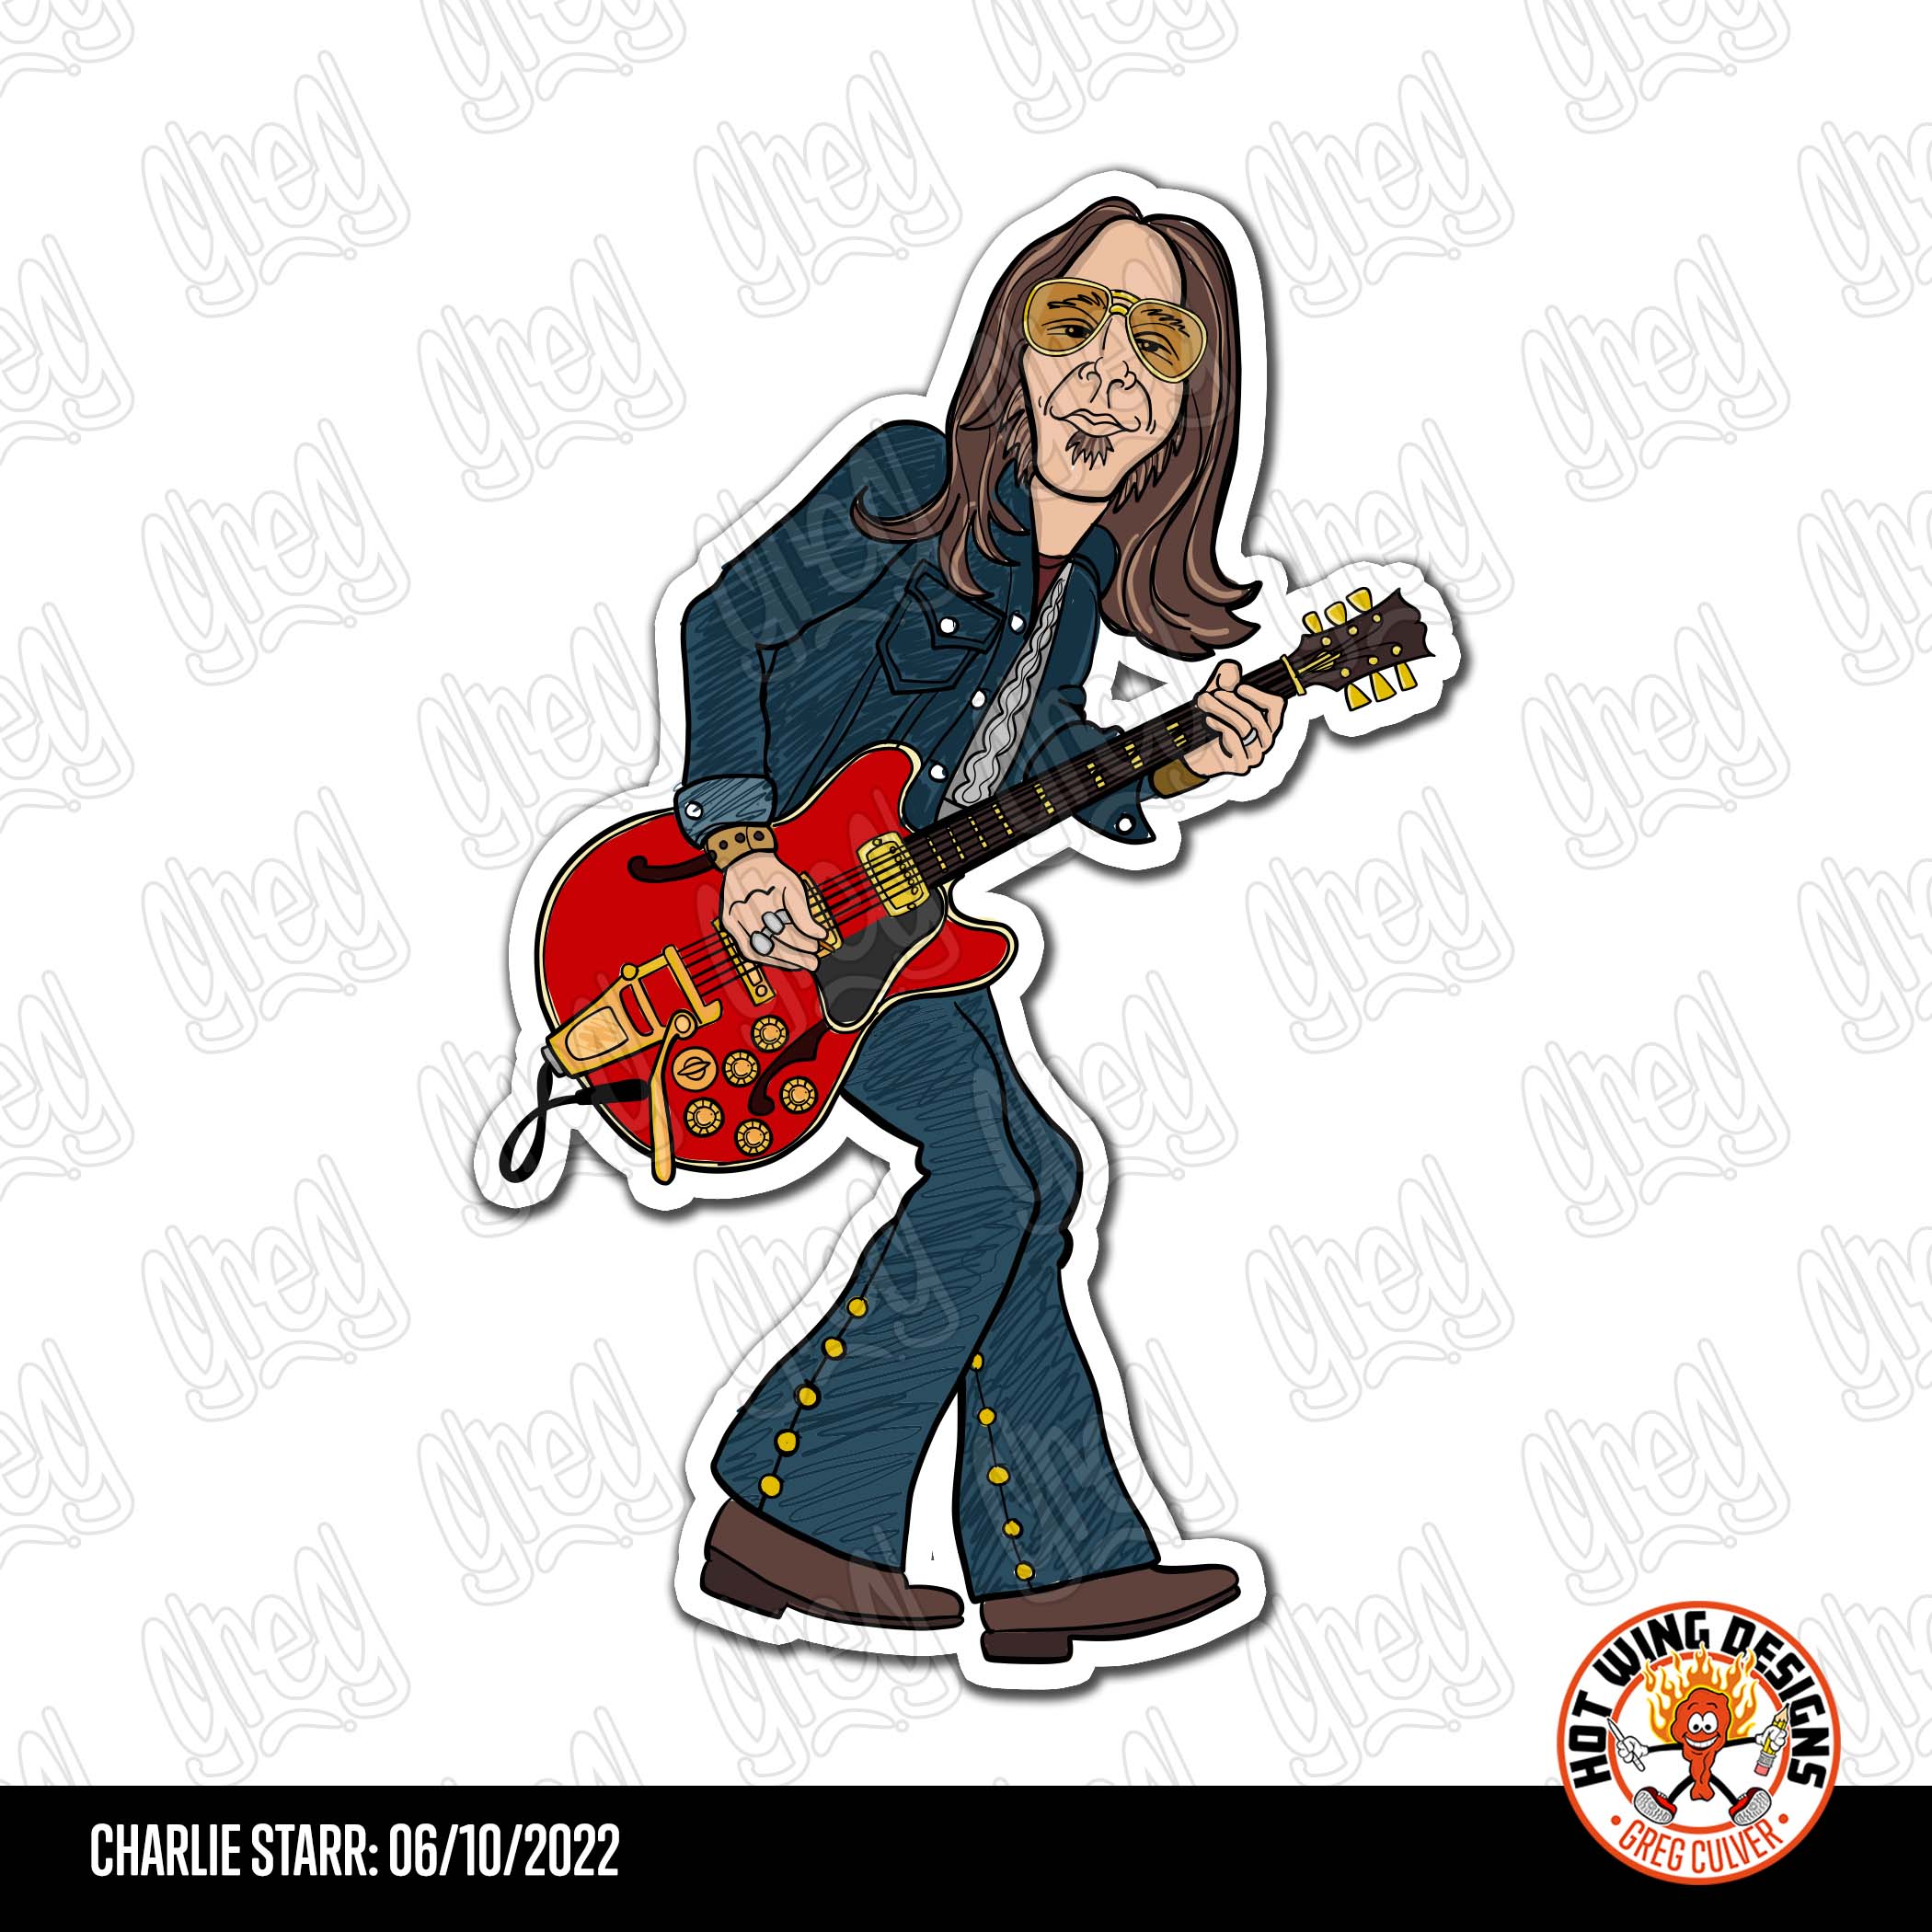 Charlie Starr Cartoon by Hot Wing Designs